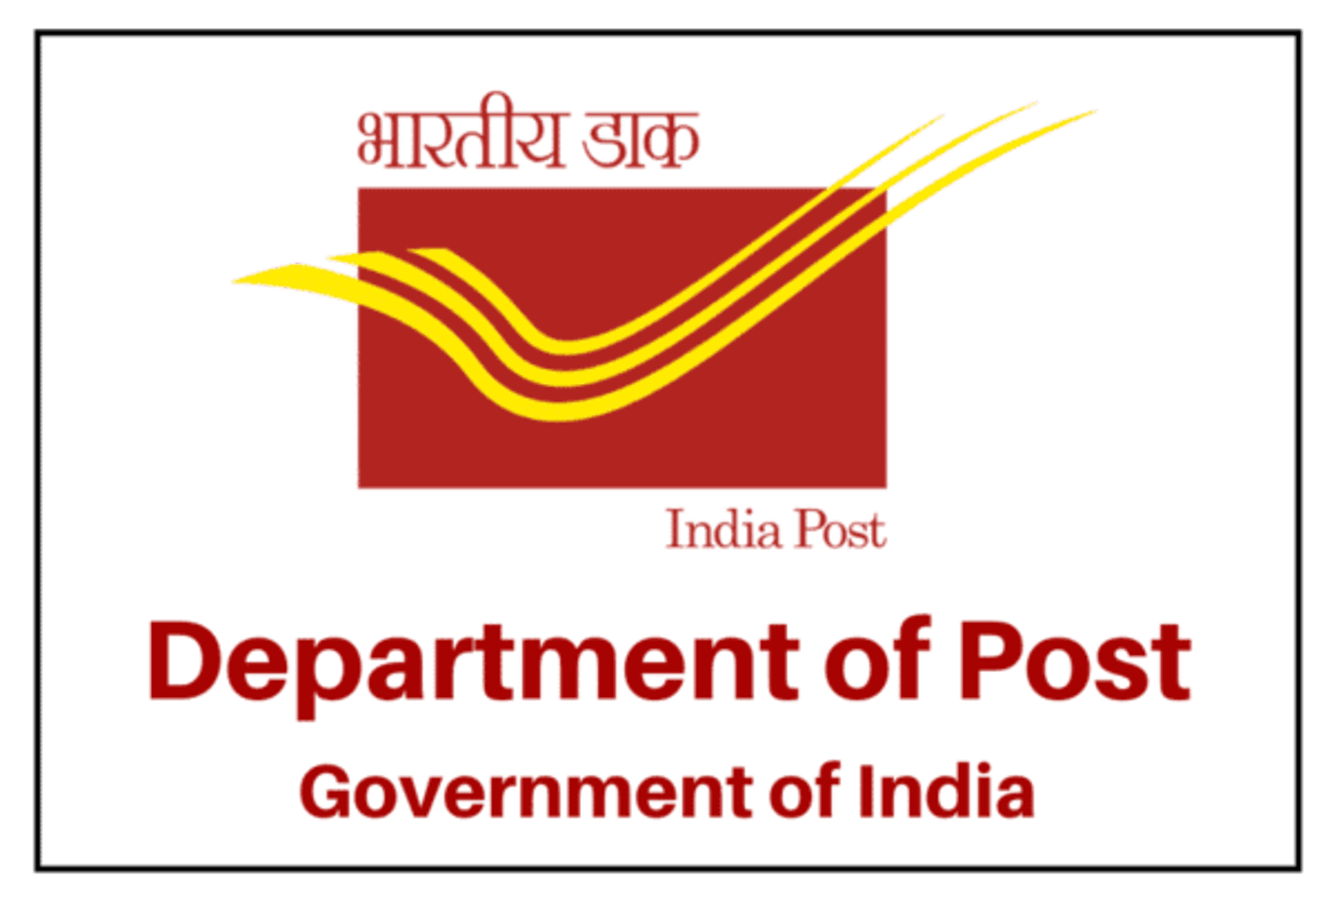 Condonation of period of irregular retention beyond 65 years of GDS - Delegation of powers: Department of Posts